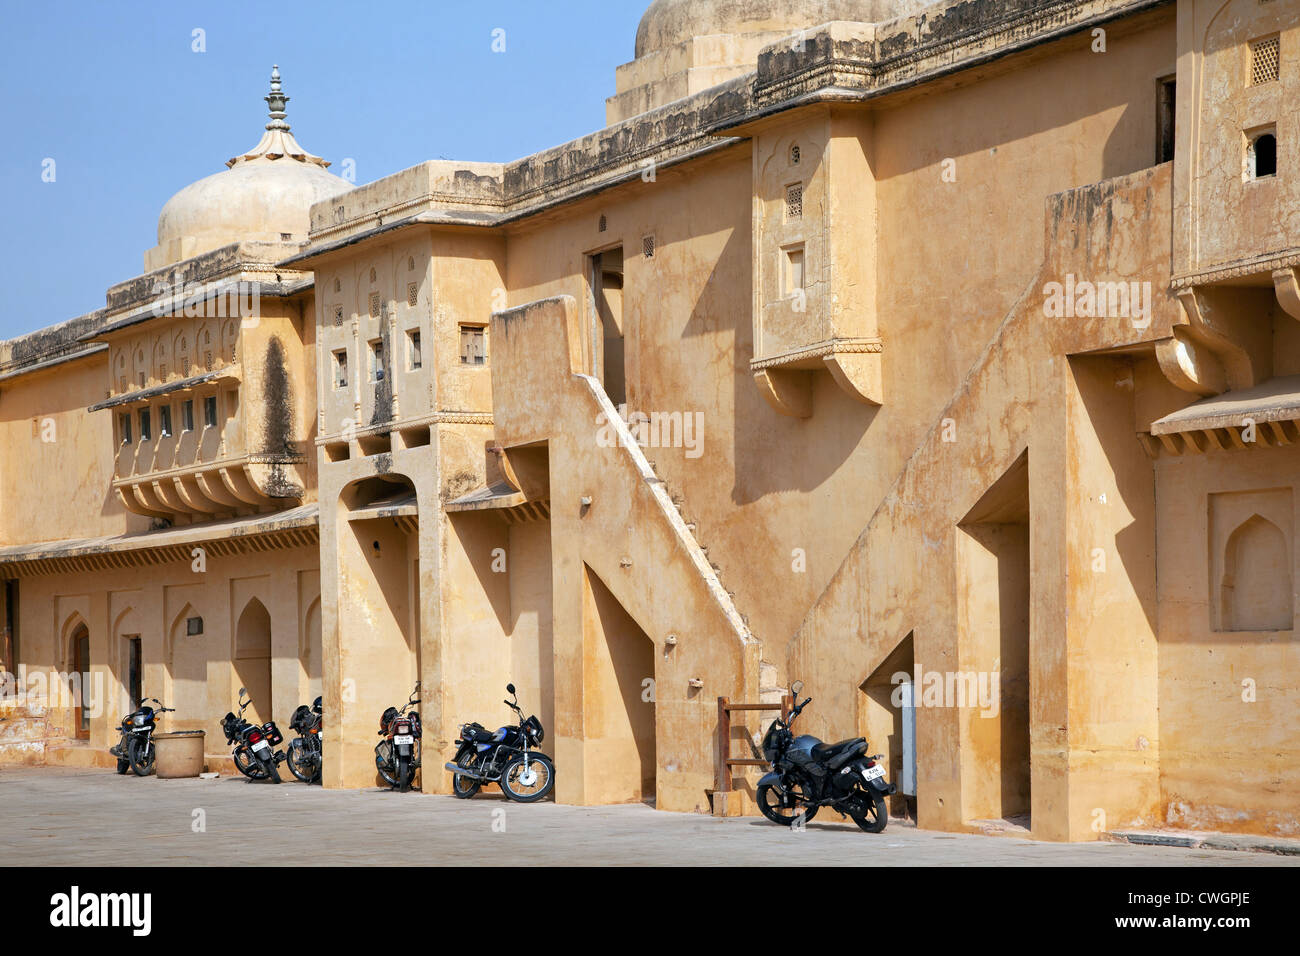 Forte Amer / Ambra Fort, palazzo in pietra arenaria rossa a Amer vicino a Jaipur, Rajasthan, India Foto Stock